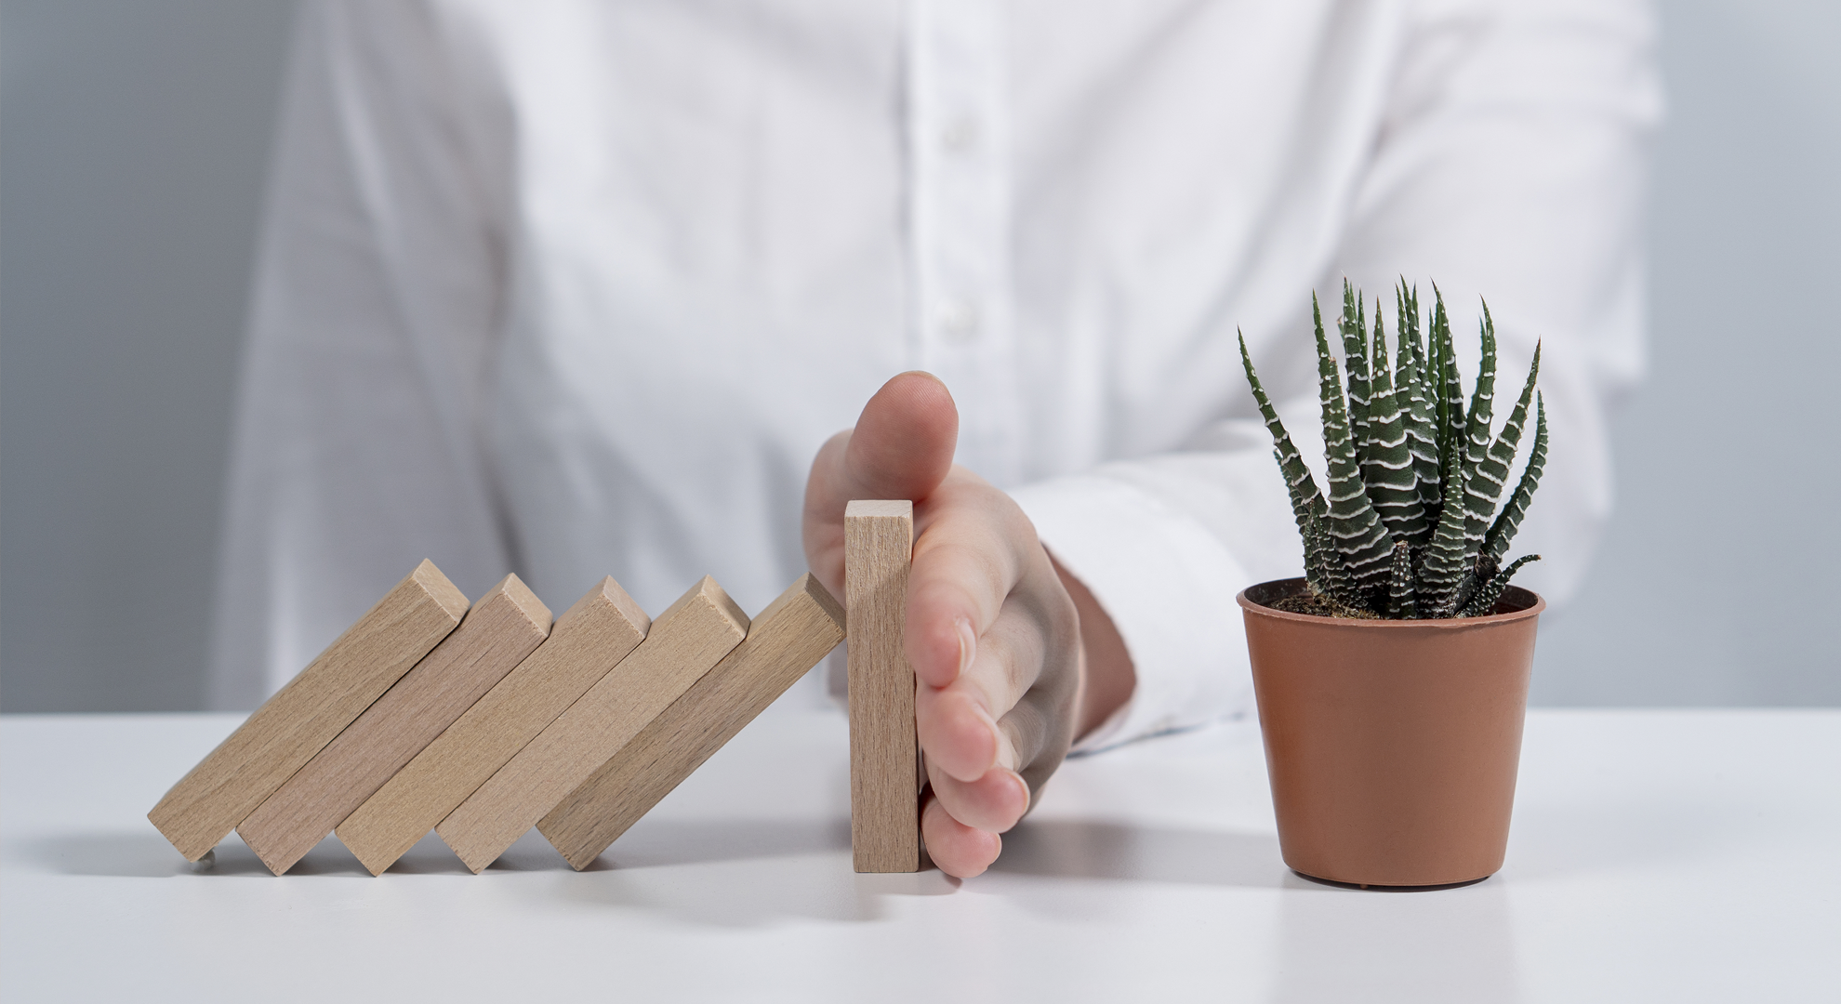 A person using their hand to stop wooden dominoes from hitting a plant